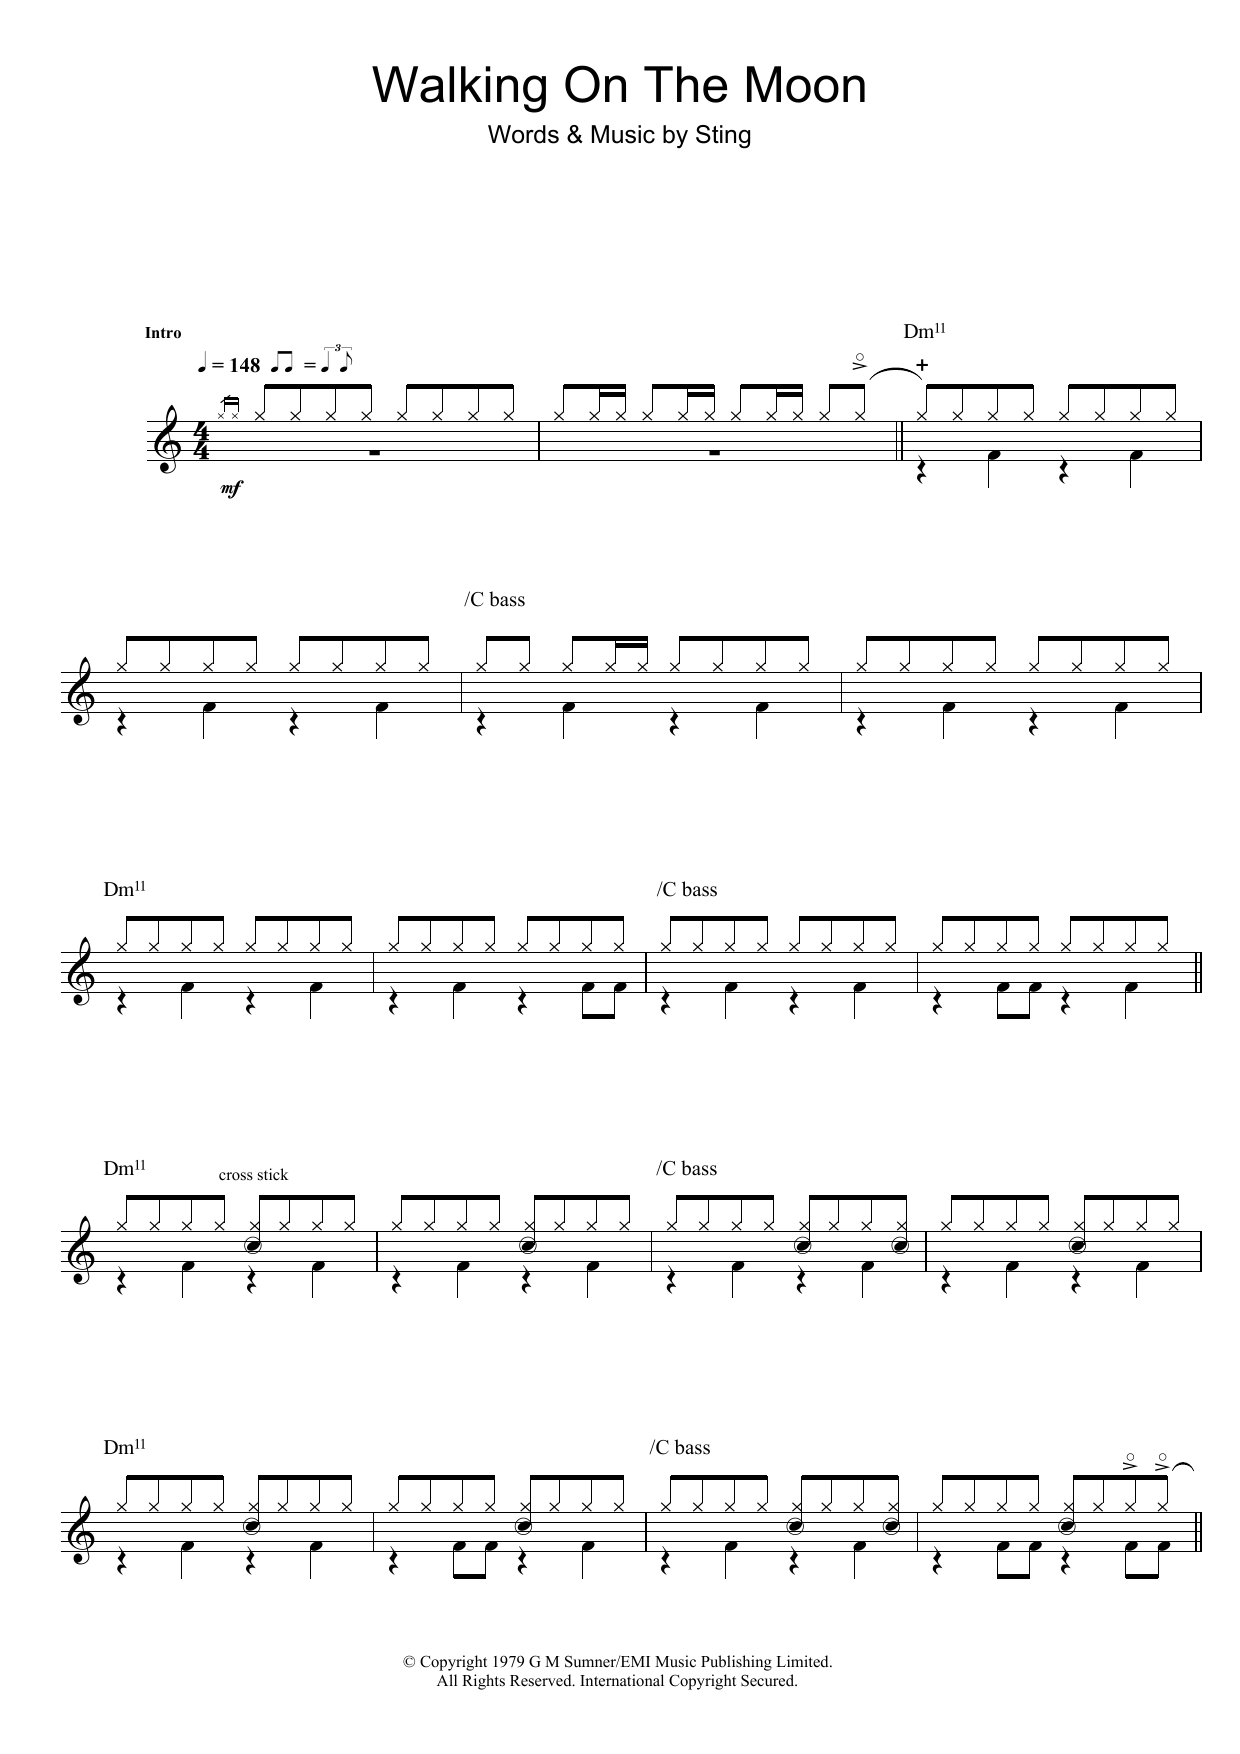 Download The Police Walking On The Moon Sheet Music